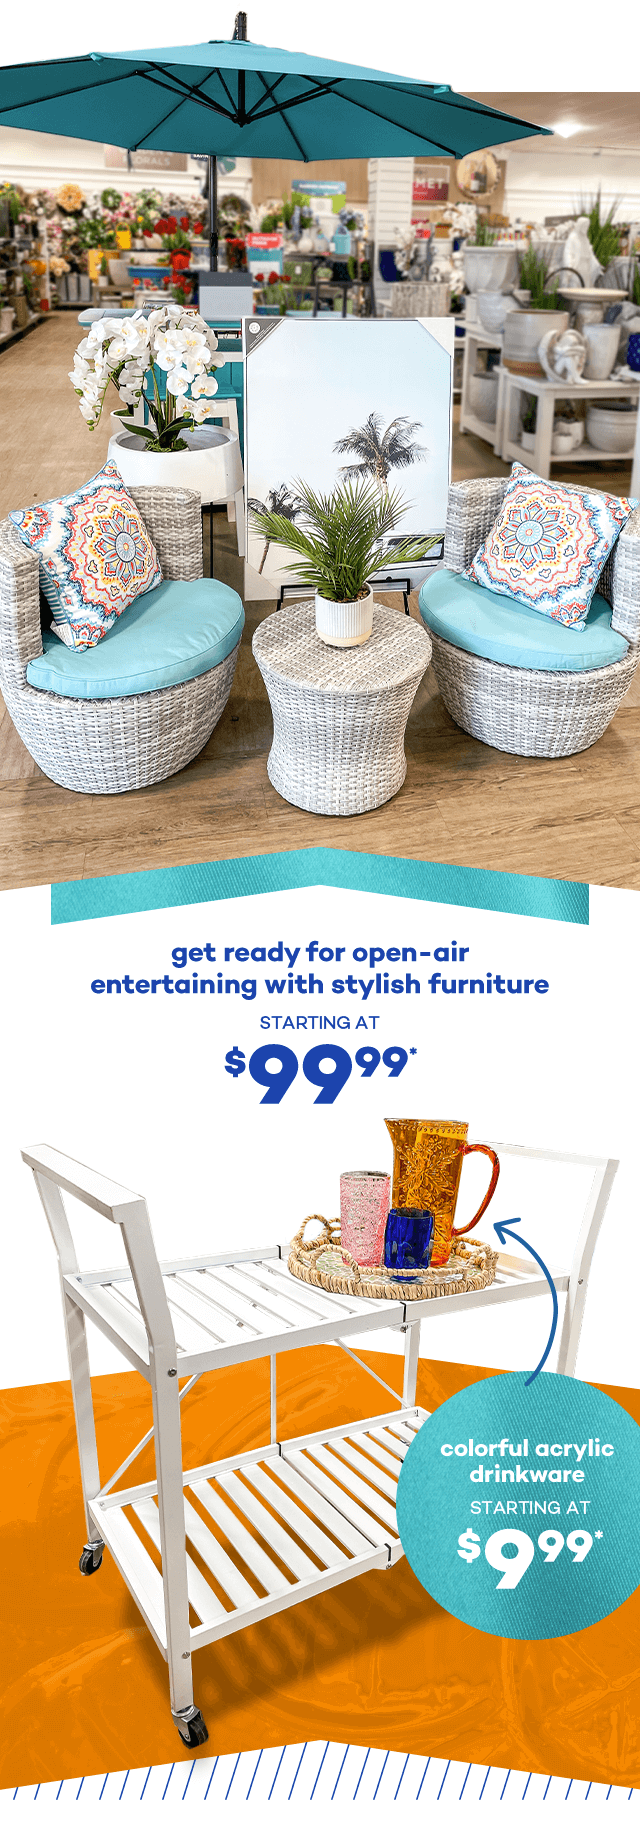 Get ready for open-air entertaining with stylish furniture starting at $99.99.* Colorful acrylic drinkware starting at $9.99.*